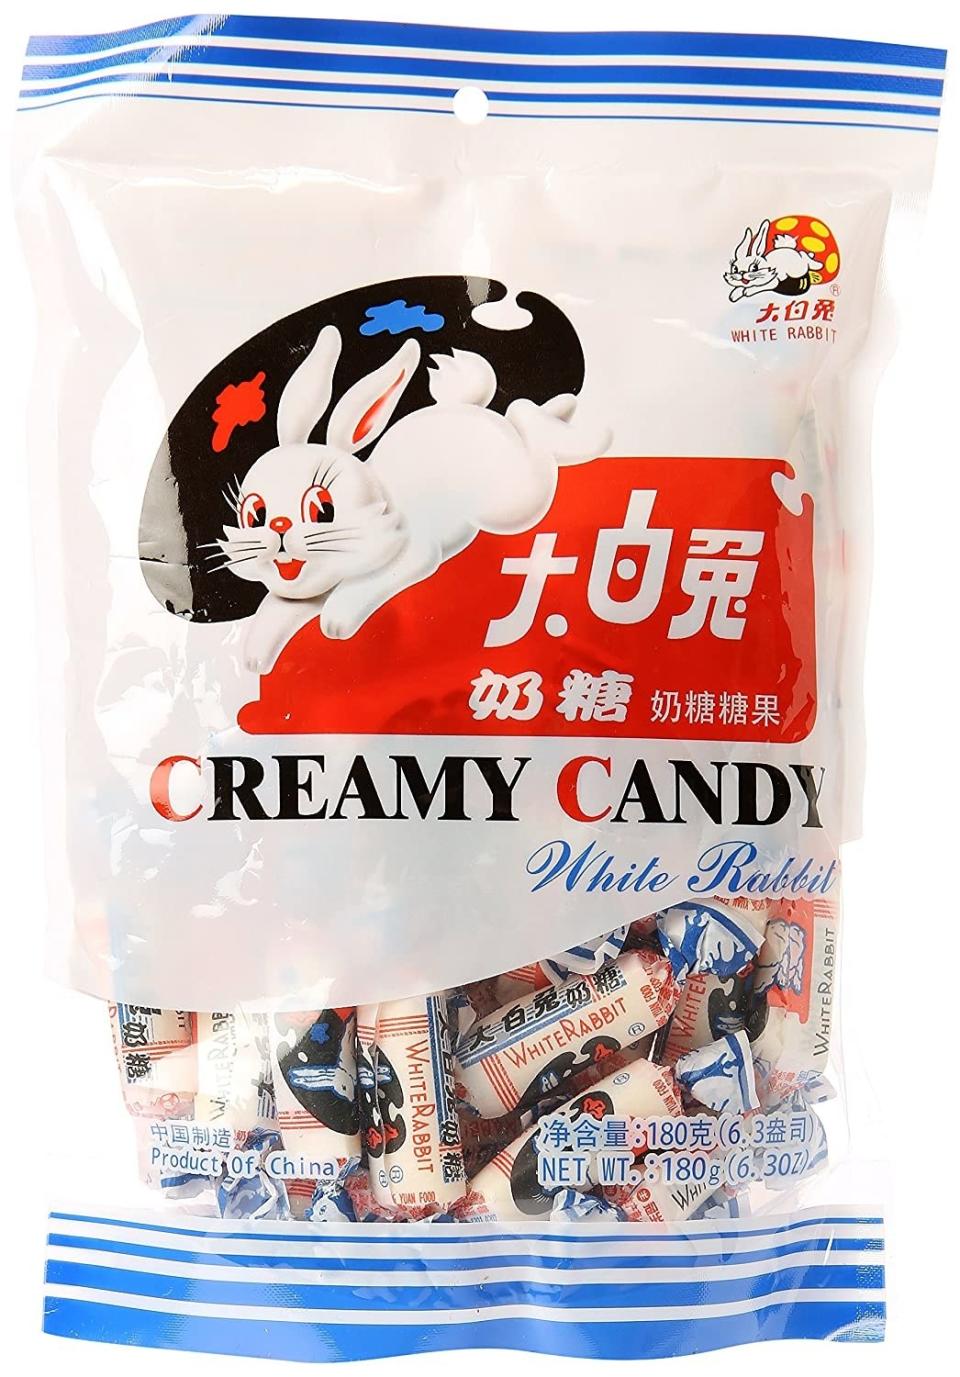 To be honest, I'm not super into candy, but I really liked White Rabbit. It's a milk-based, chewy candy, if you haven't tried it, and it's been around since 1943.(You can get a bag of White Rabbit Creamy Candy from Amazon for $7.24.)